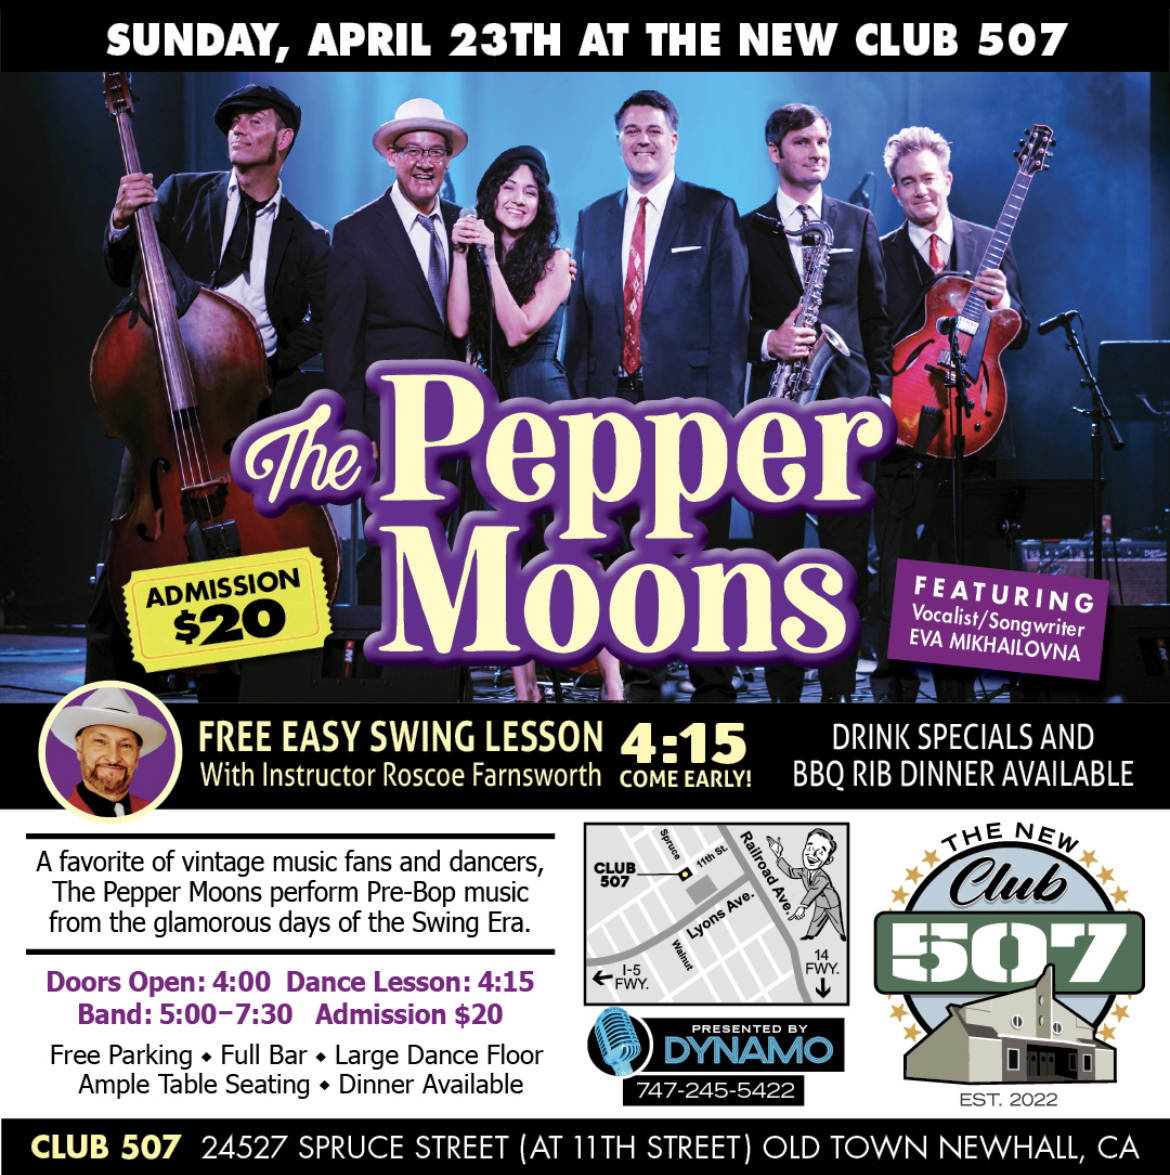 The PEPPER MOONS Debut at the “New” CLUB 507 in NEWHALL